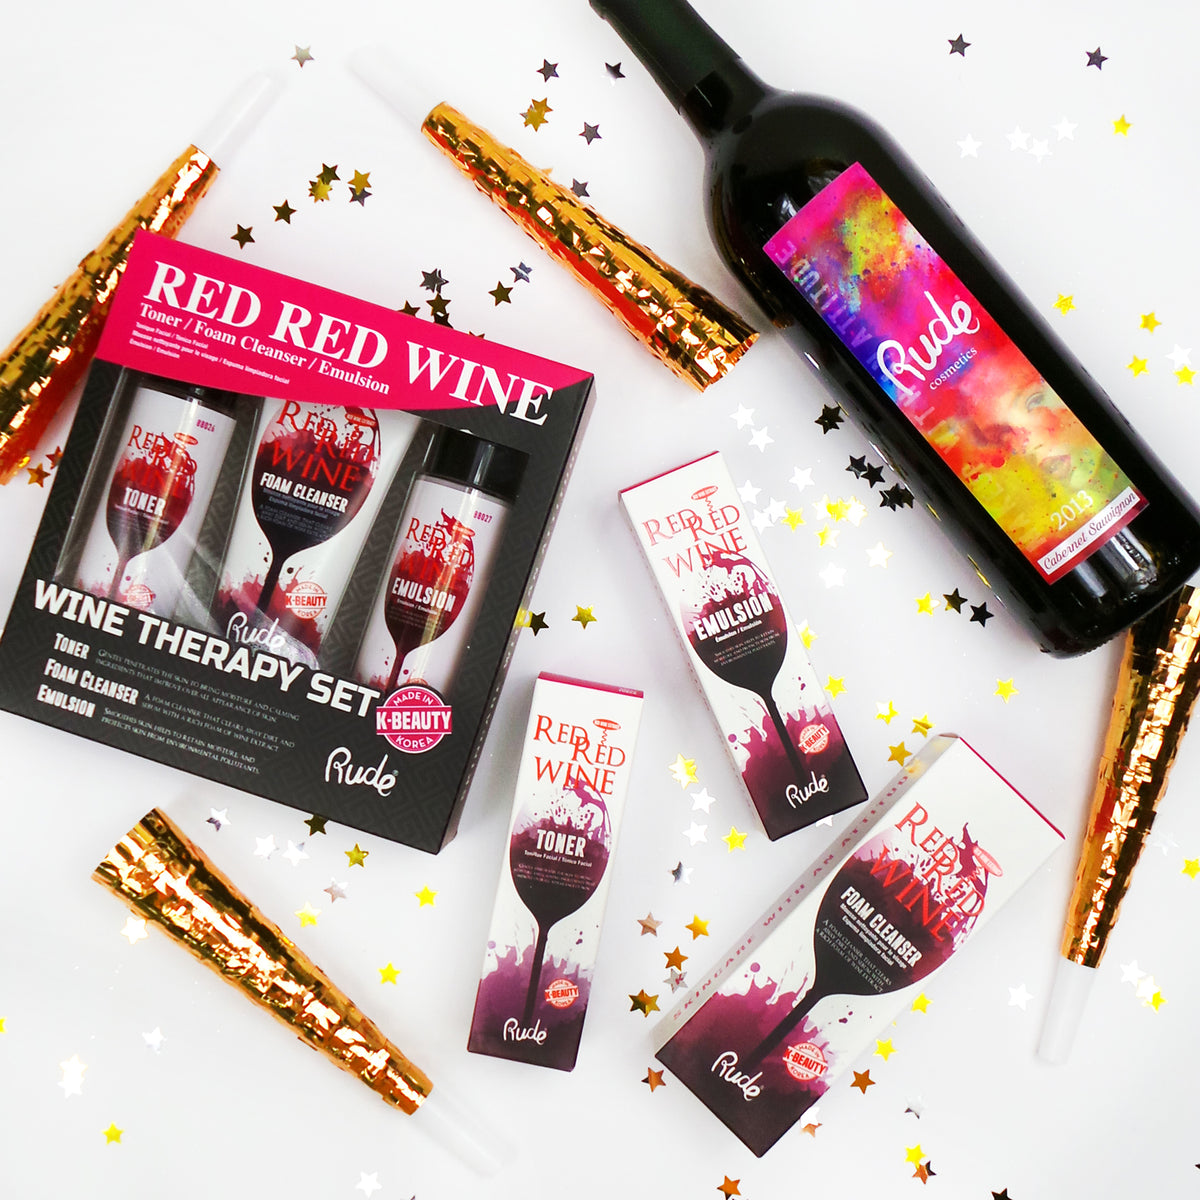 Red Red Wine - Wine Therapy Set Lifestyle